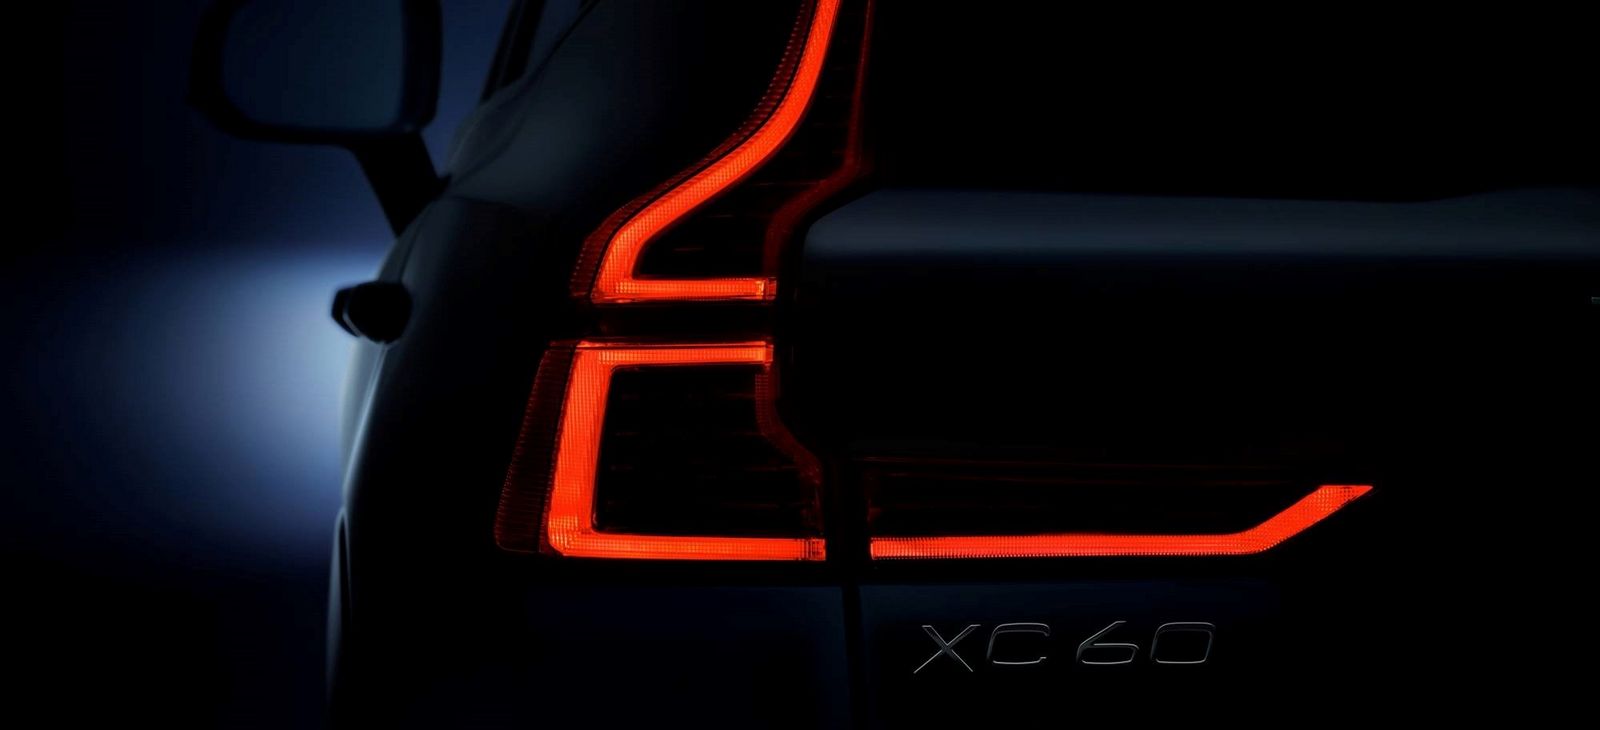 The new Volvo XC60 – Teaser image